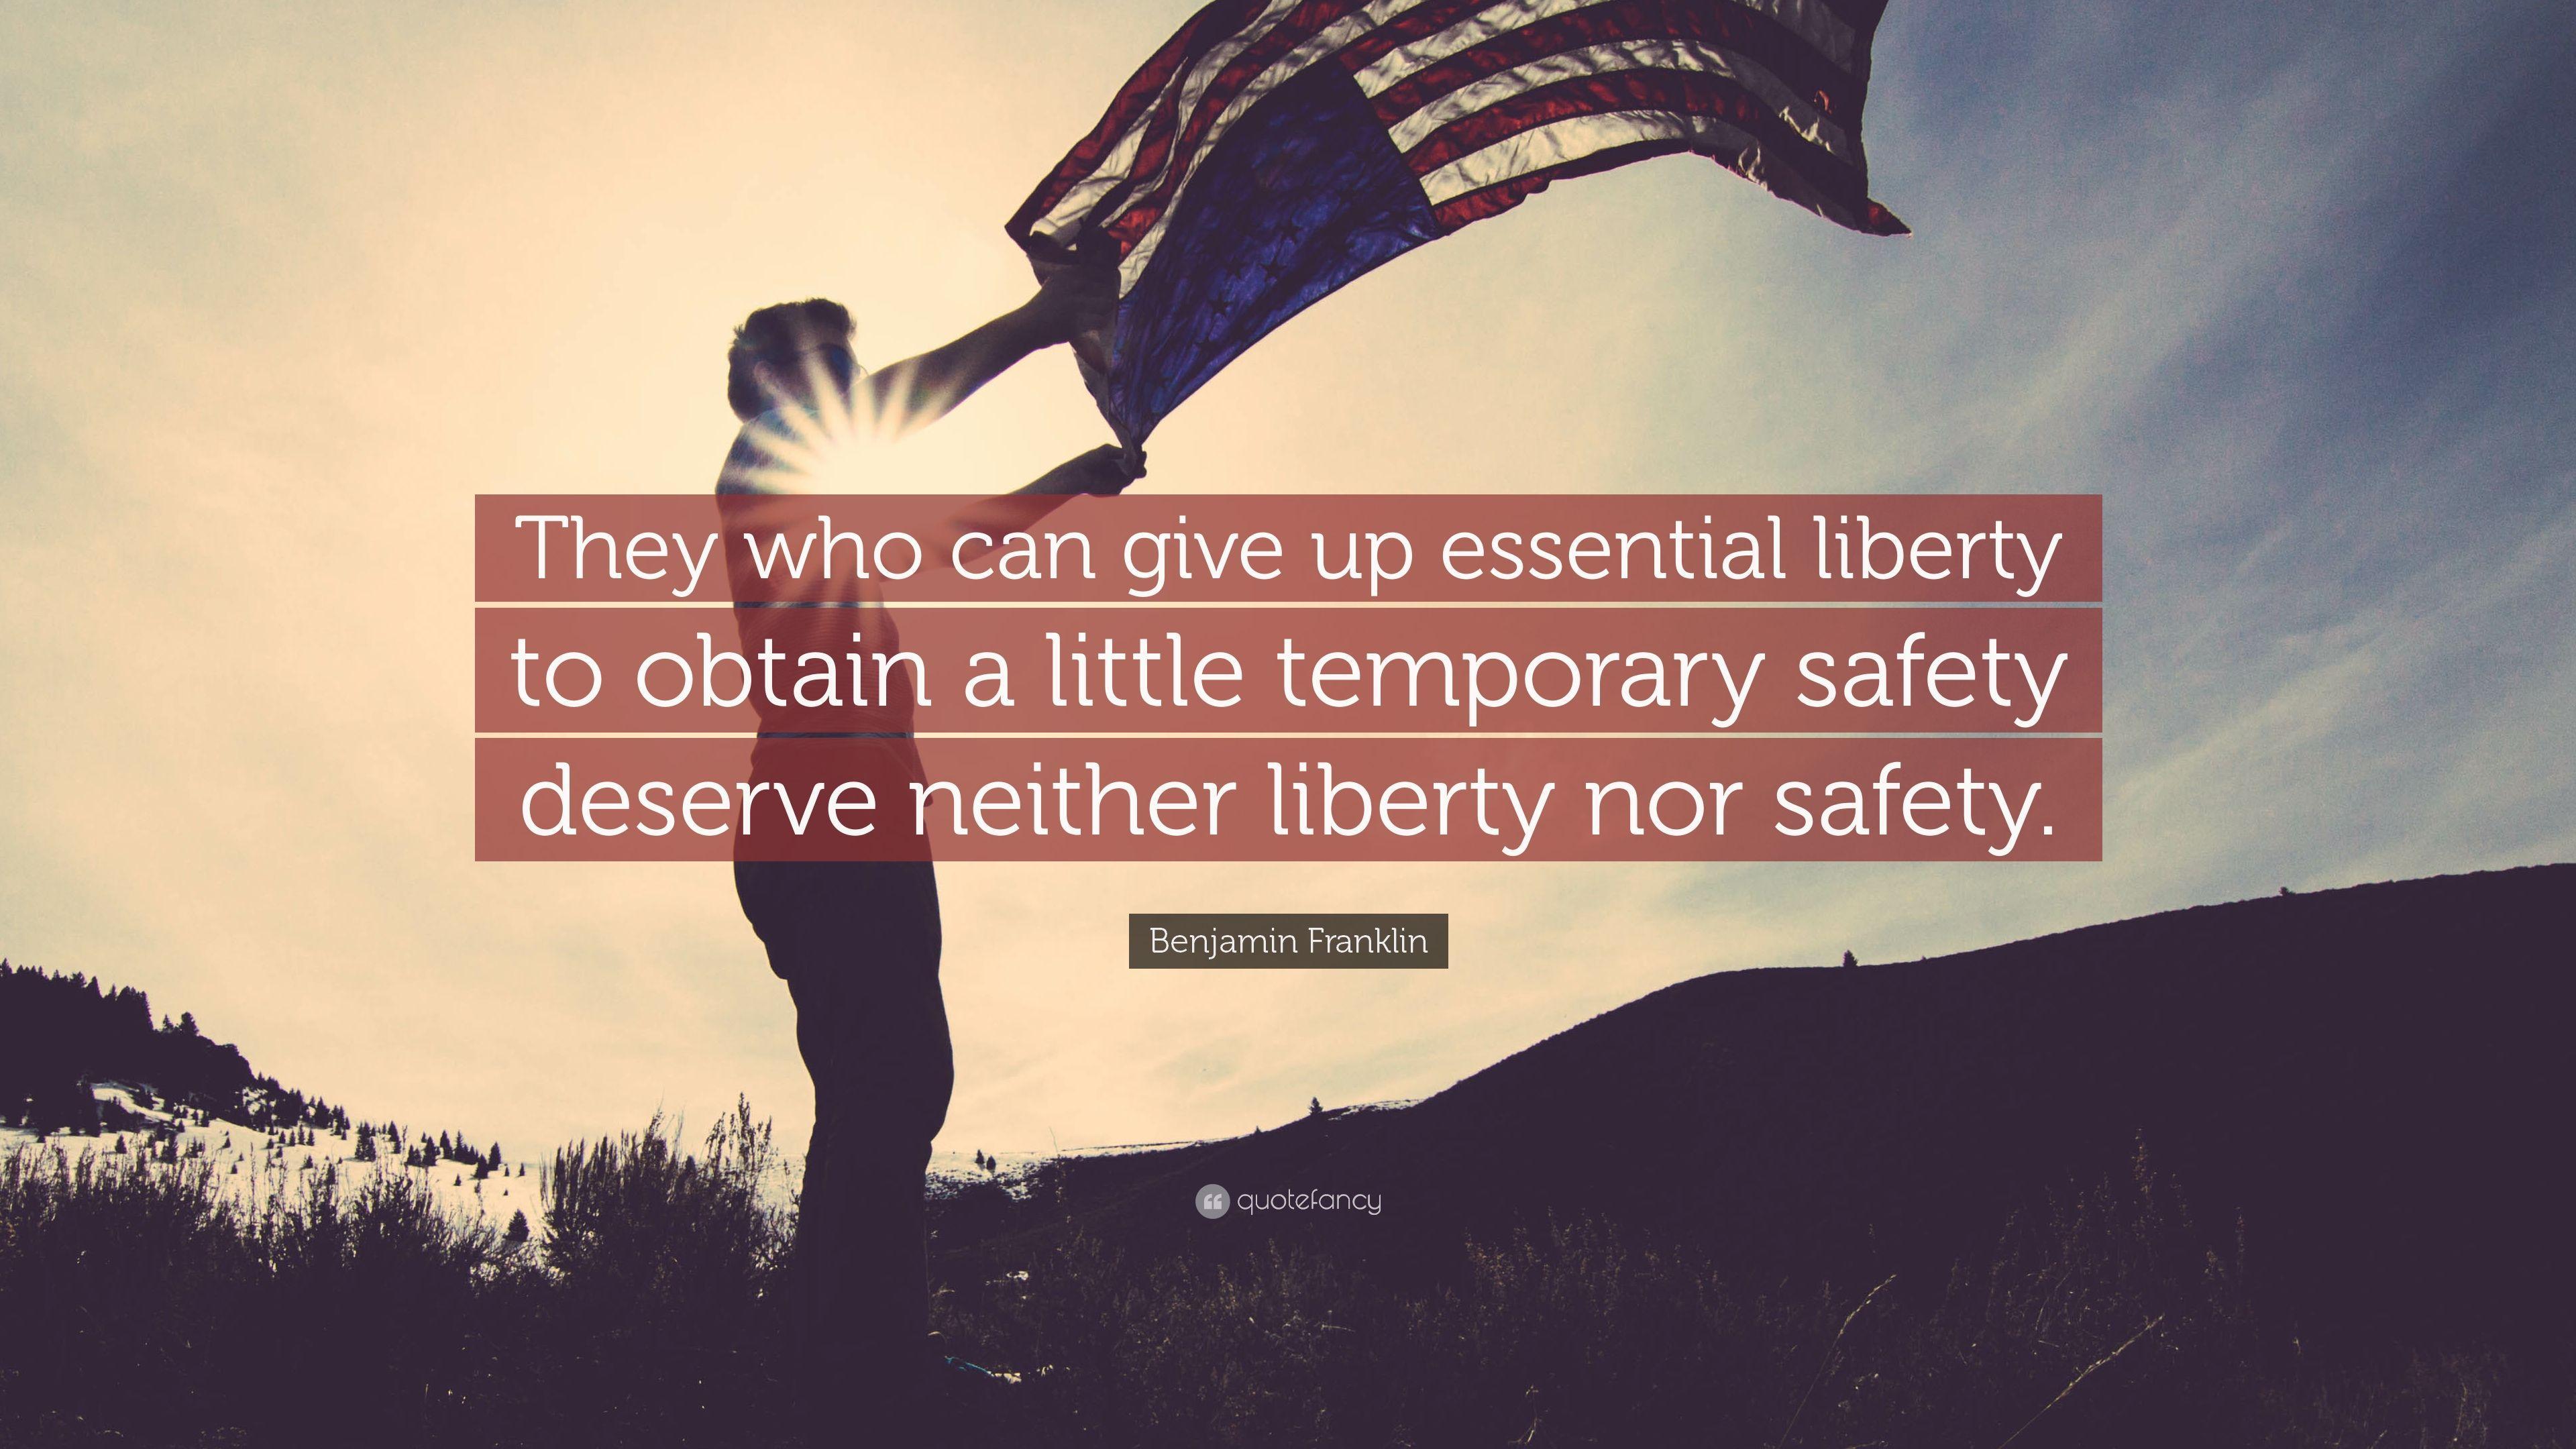 Benjamin Franklin Quote: “They who can give up essential liberty